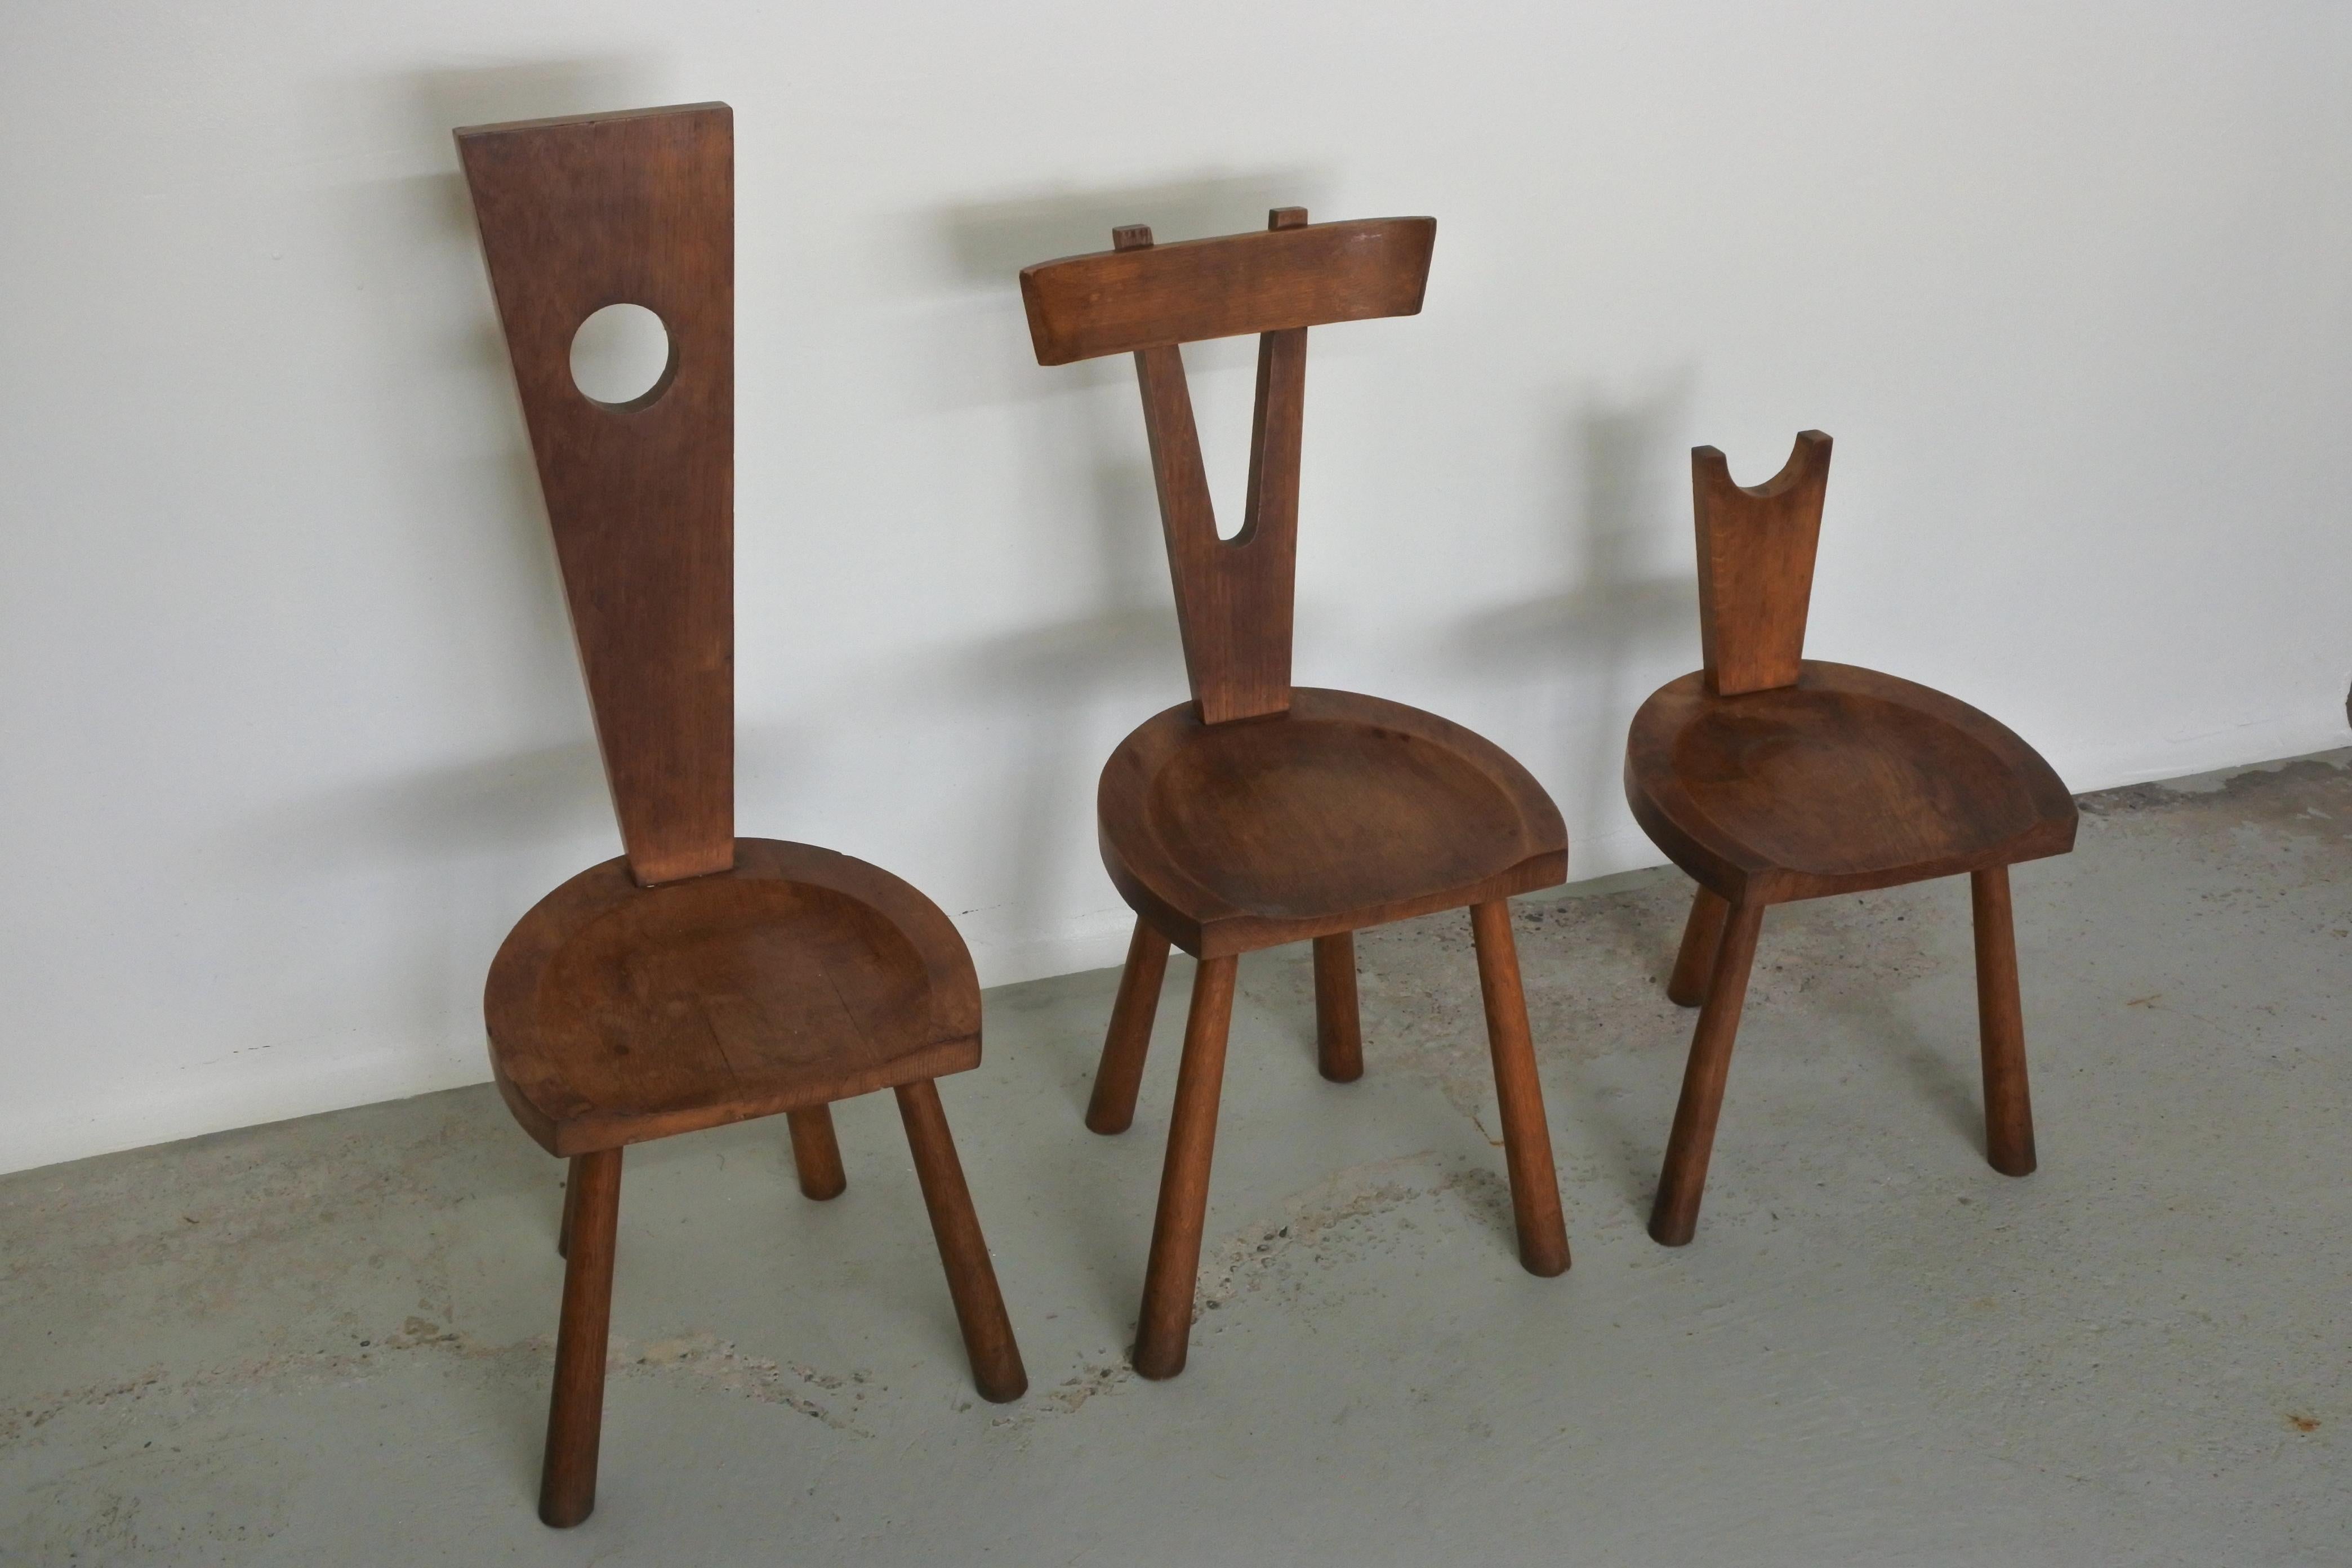 Mid-20th Century Set of Three Studio Chairs in Solid Oak Wood, France 1950s